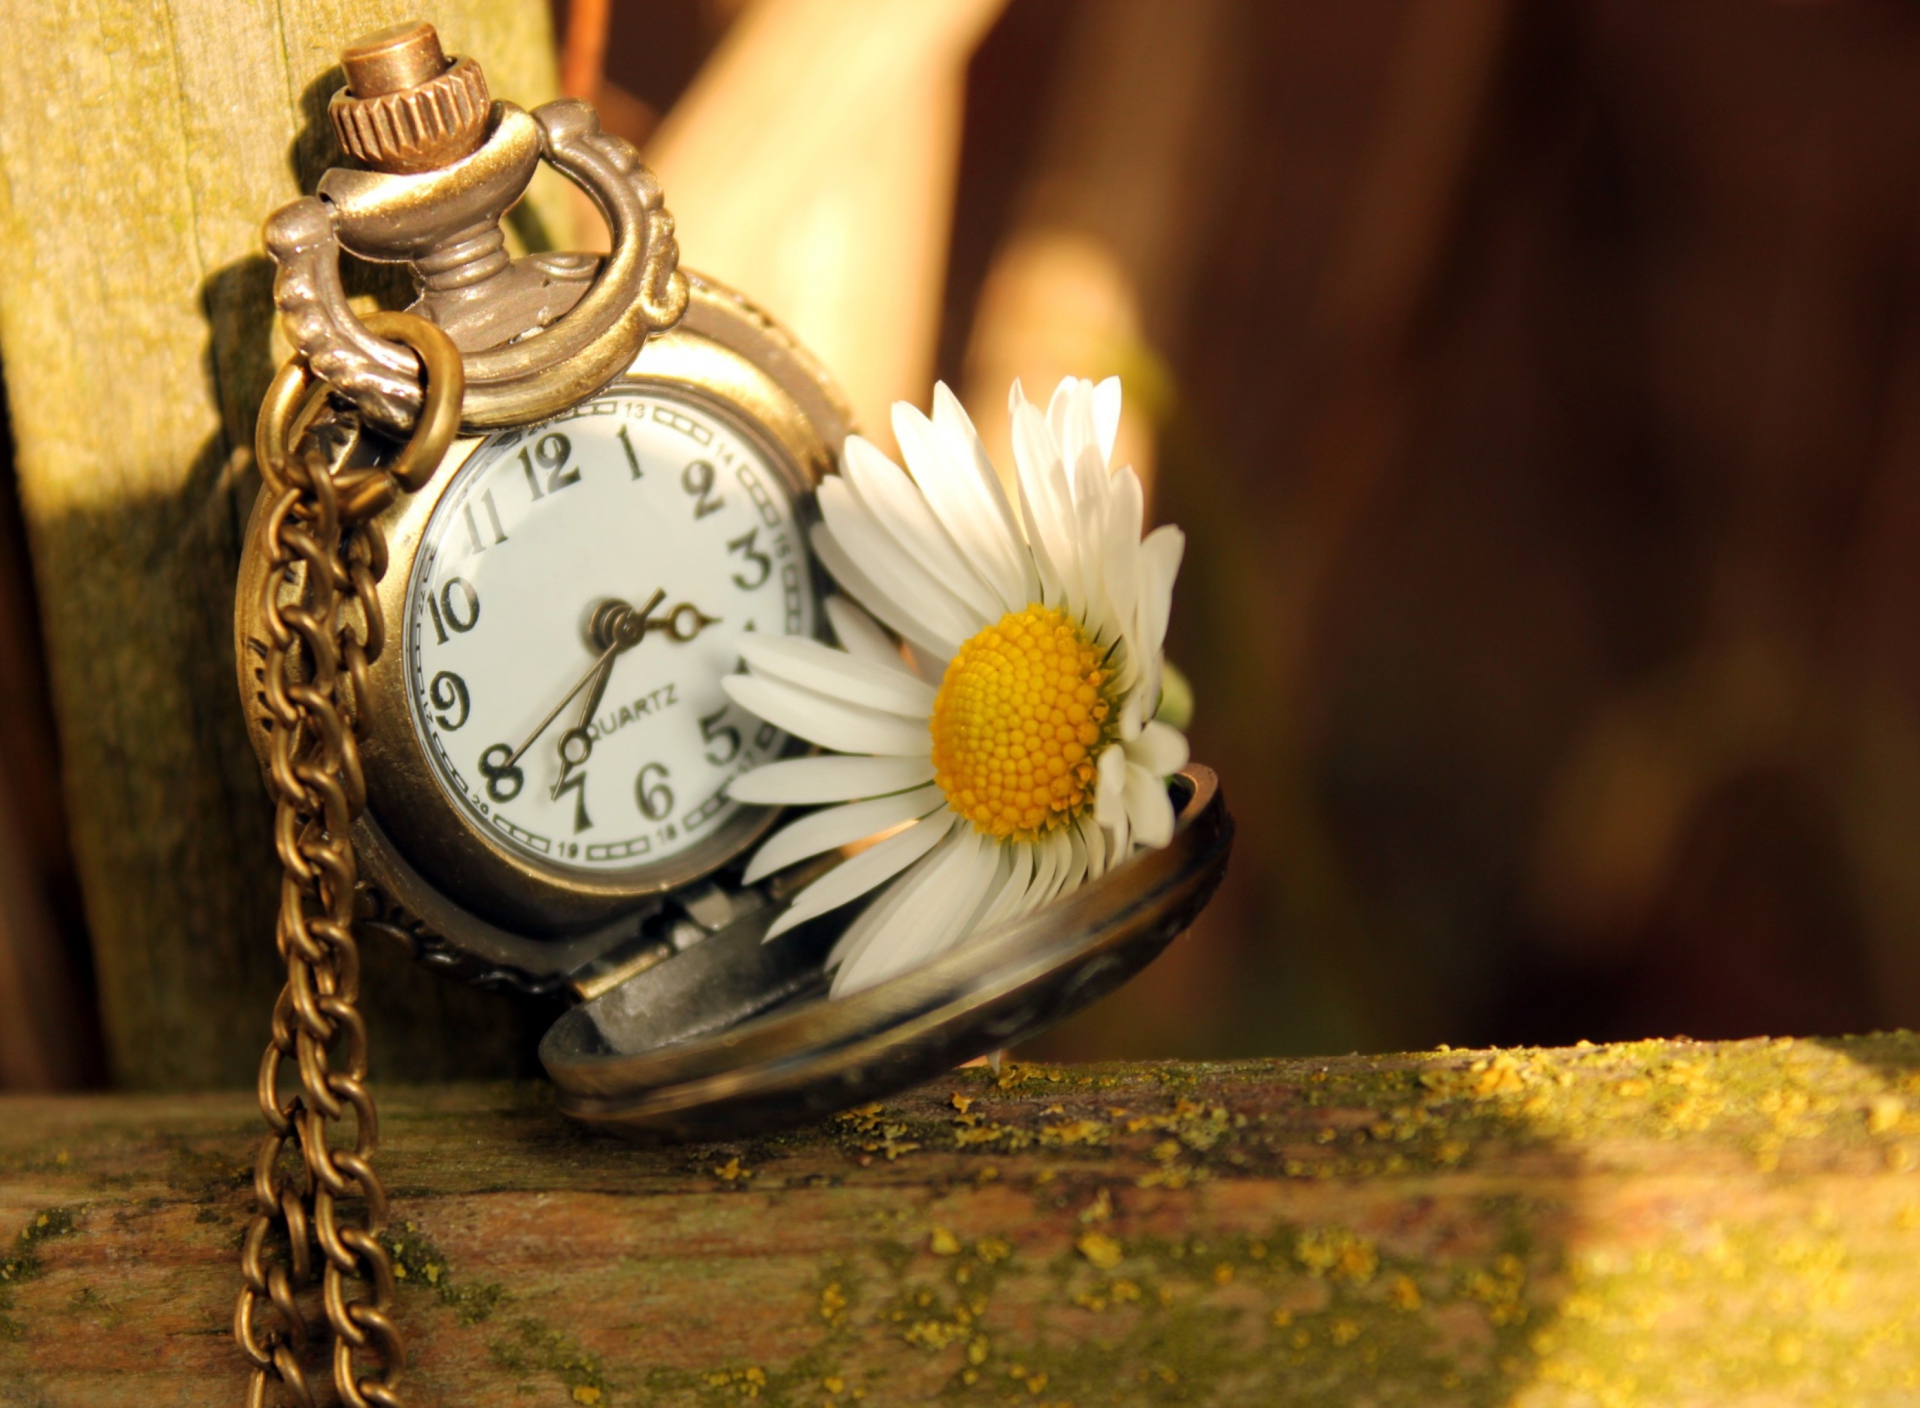 Vintage Watch And Daisy wallpaper 1920x1408